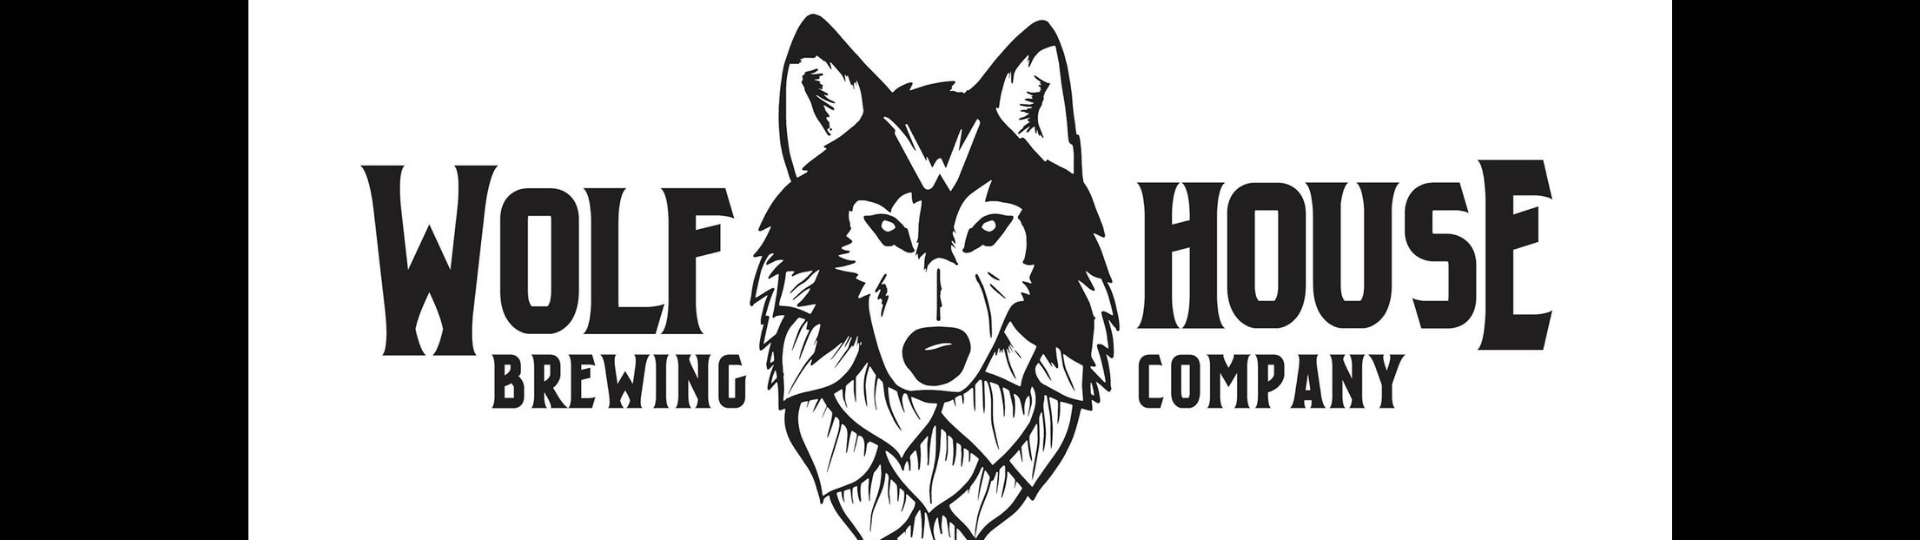 wolf house brewing company with wolf logo